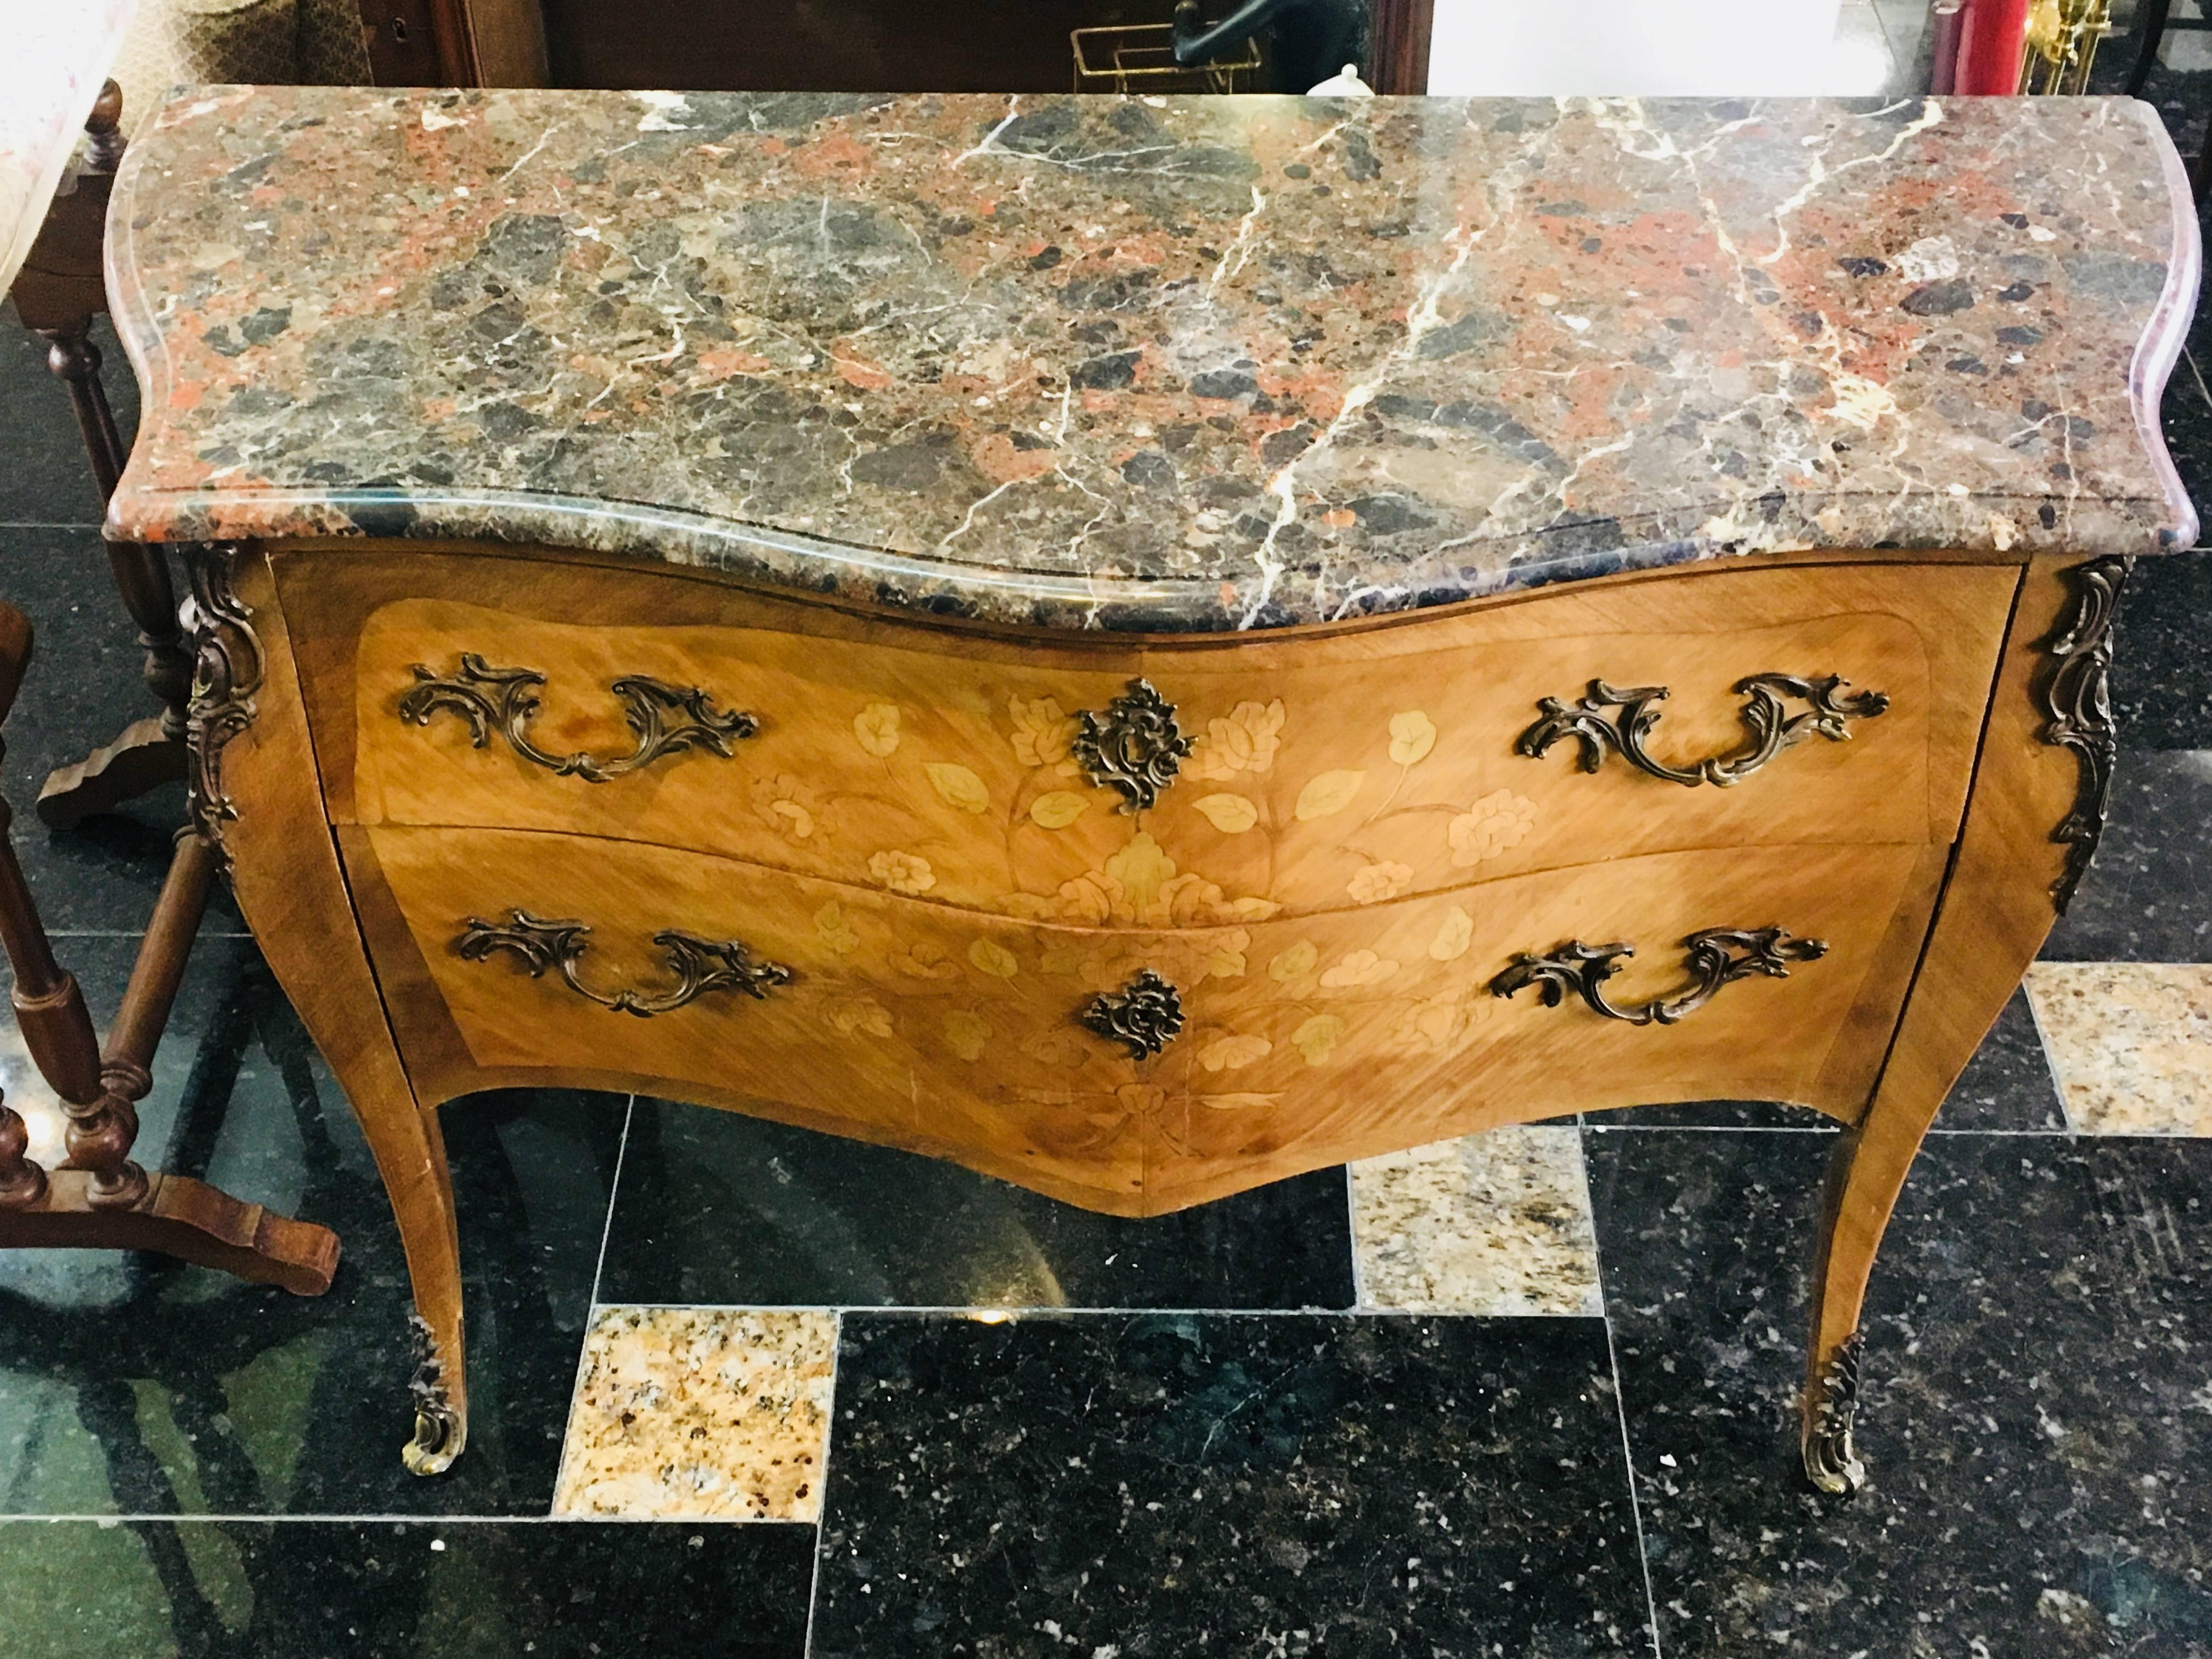 Magnificent 19th century marble-top two-drawer bombe commode from Paris, circa 1880. This commode is made from walnut and features exquisite floral marquetry decoration and original bronze handles and ornaments. Very good condition.